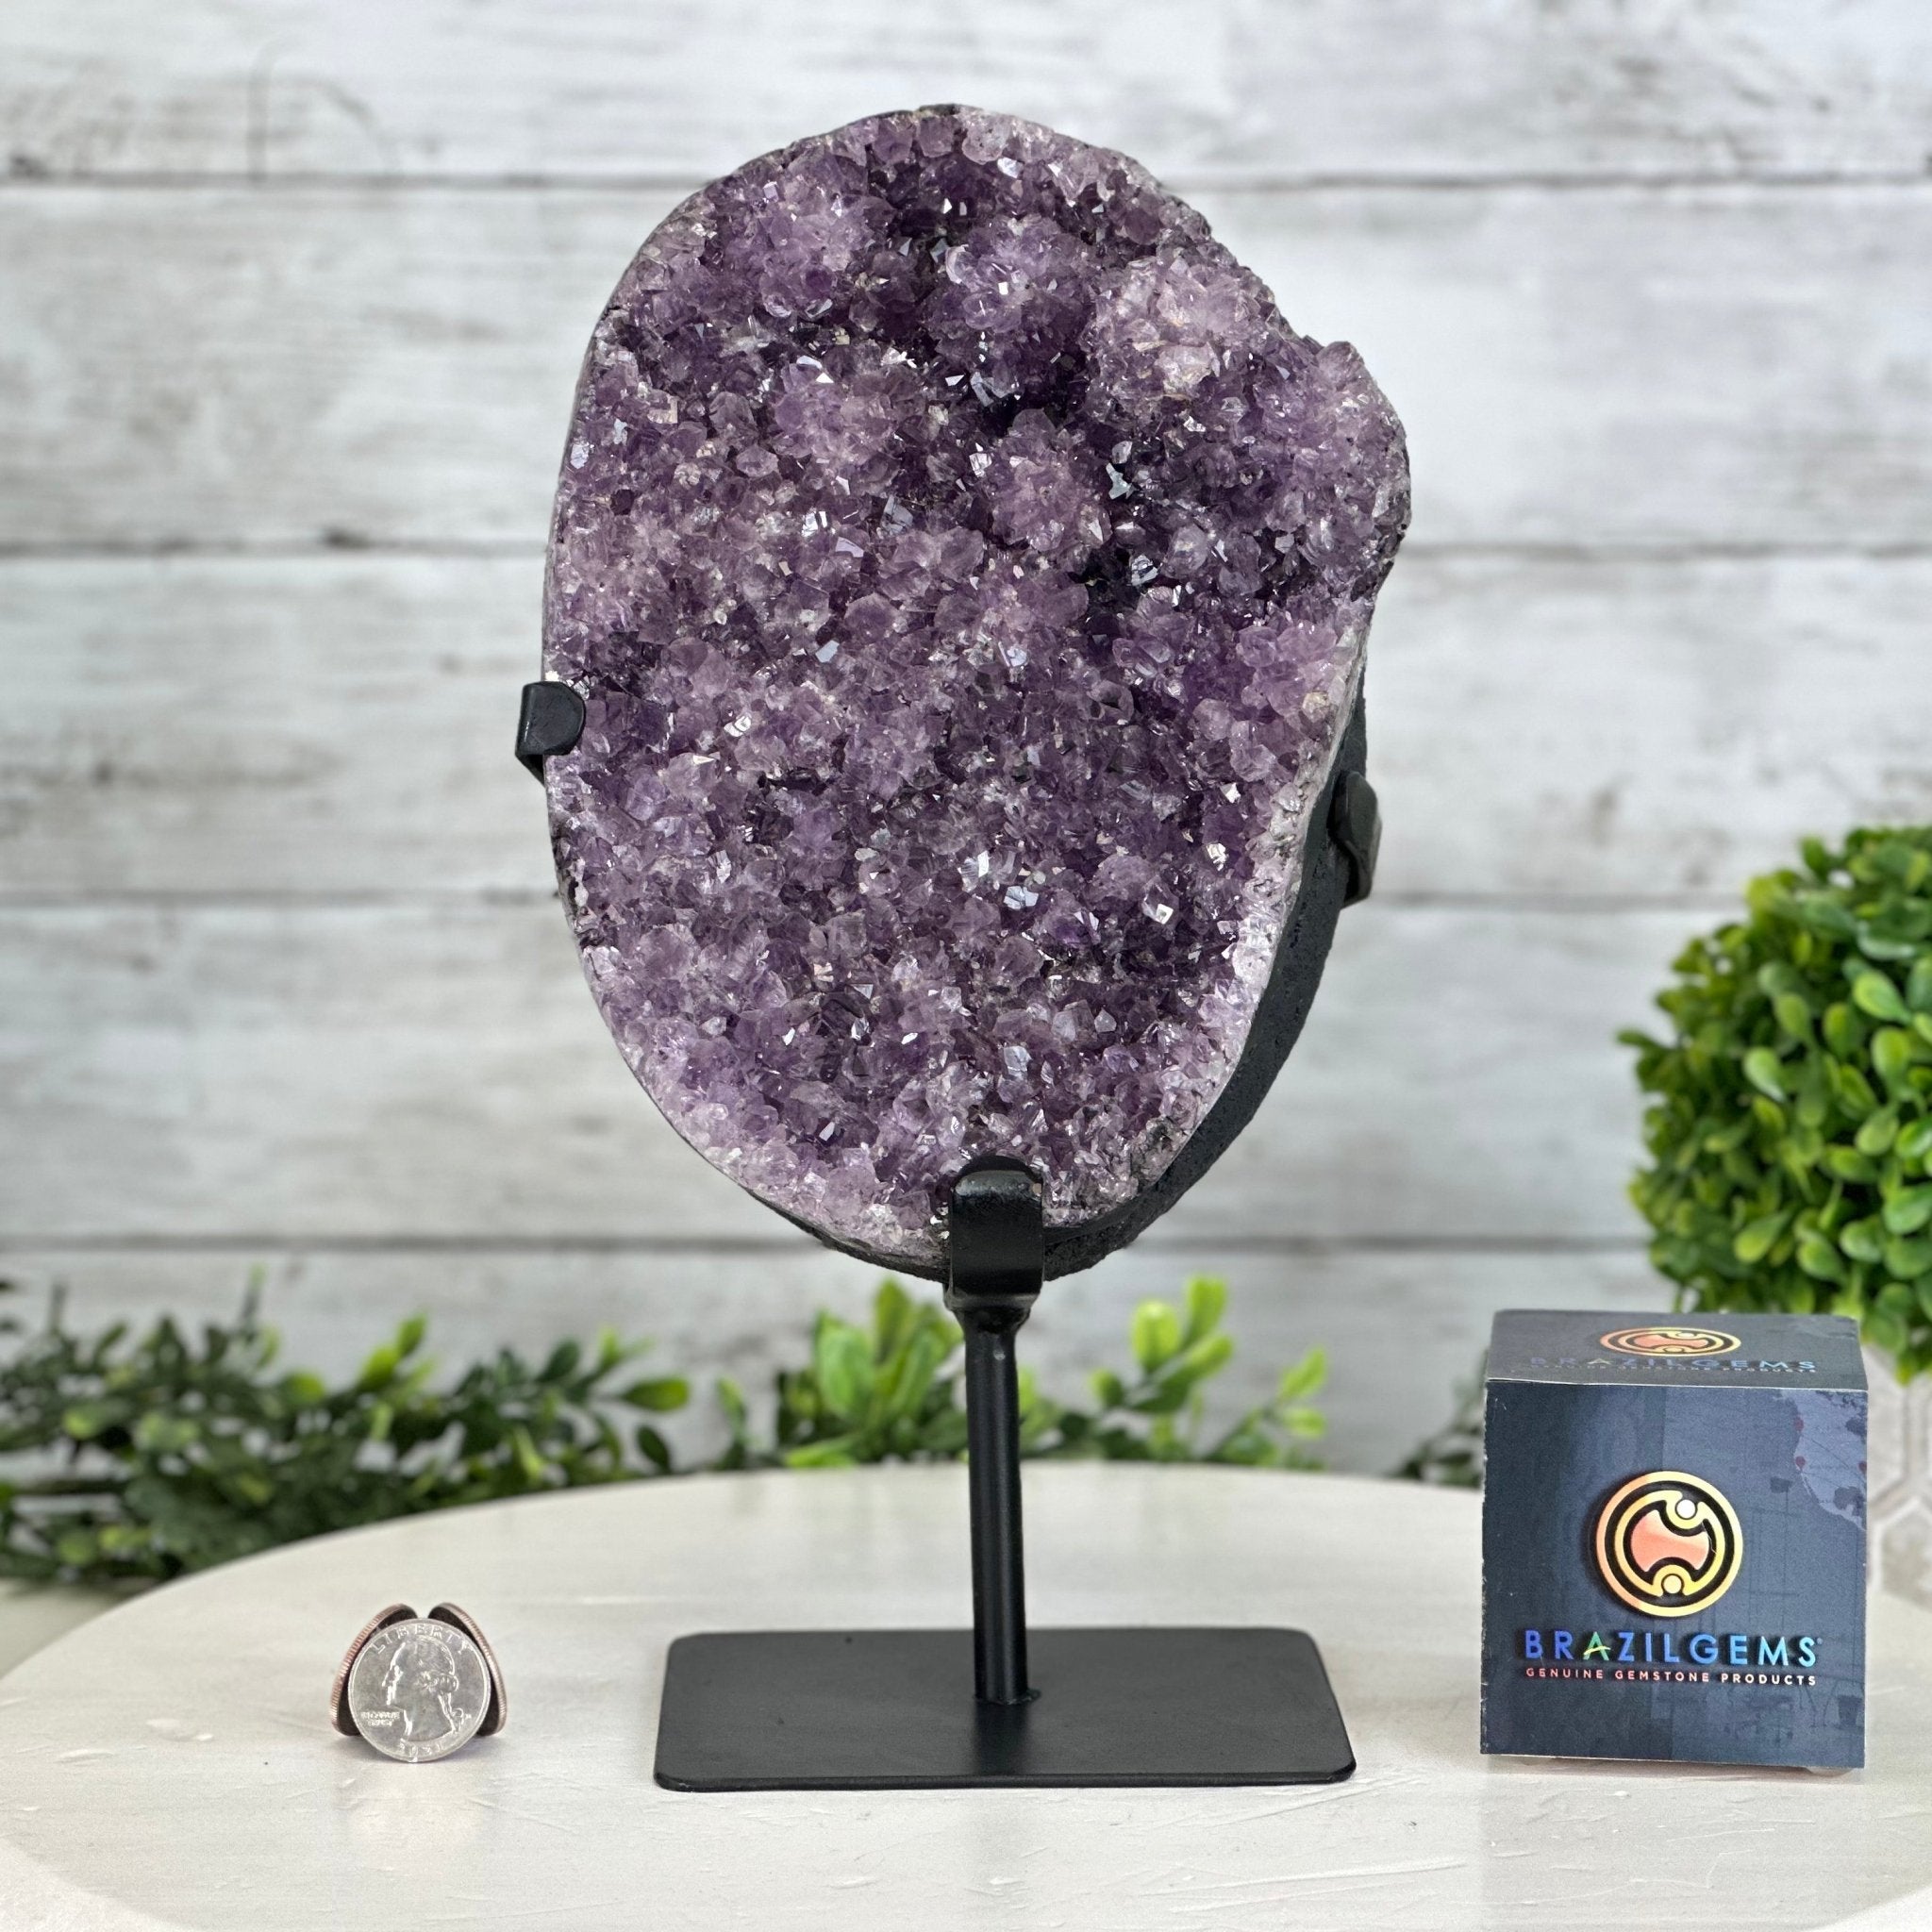 Quality Amethyst Cluster on a Metal Base, 10.1 lbs & 11" Tall #5491 - 0045 - Brazil GemsBrazil GemsQuality Amethyst Cluster on a Metal Base, 10.1 lbs & 11" Tall #5491 - 0045Clusters on Fixed Bases5491 - 0045